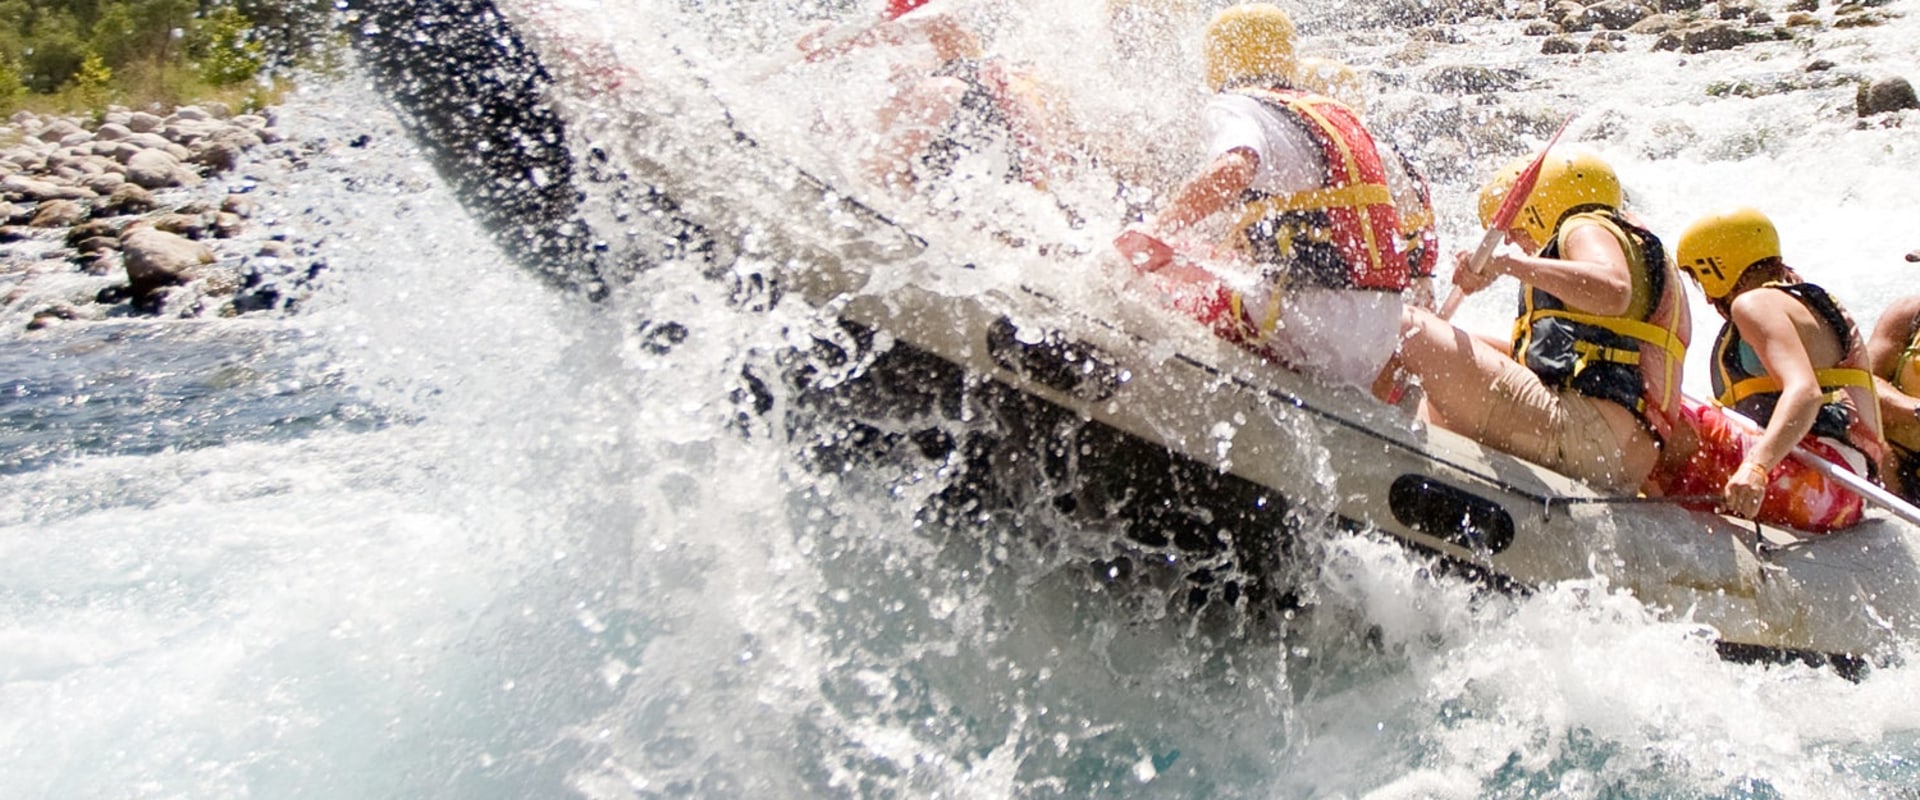 The Ultimate Guide to Water Activities for Adventure Travelers